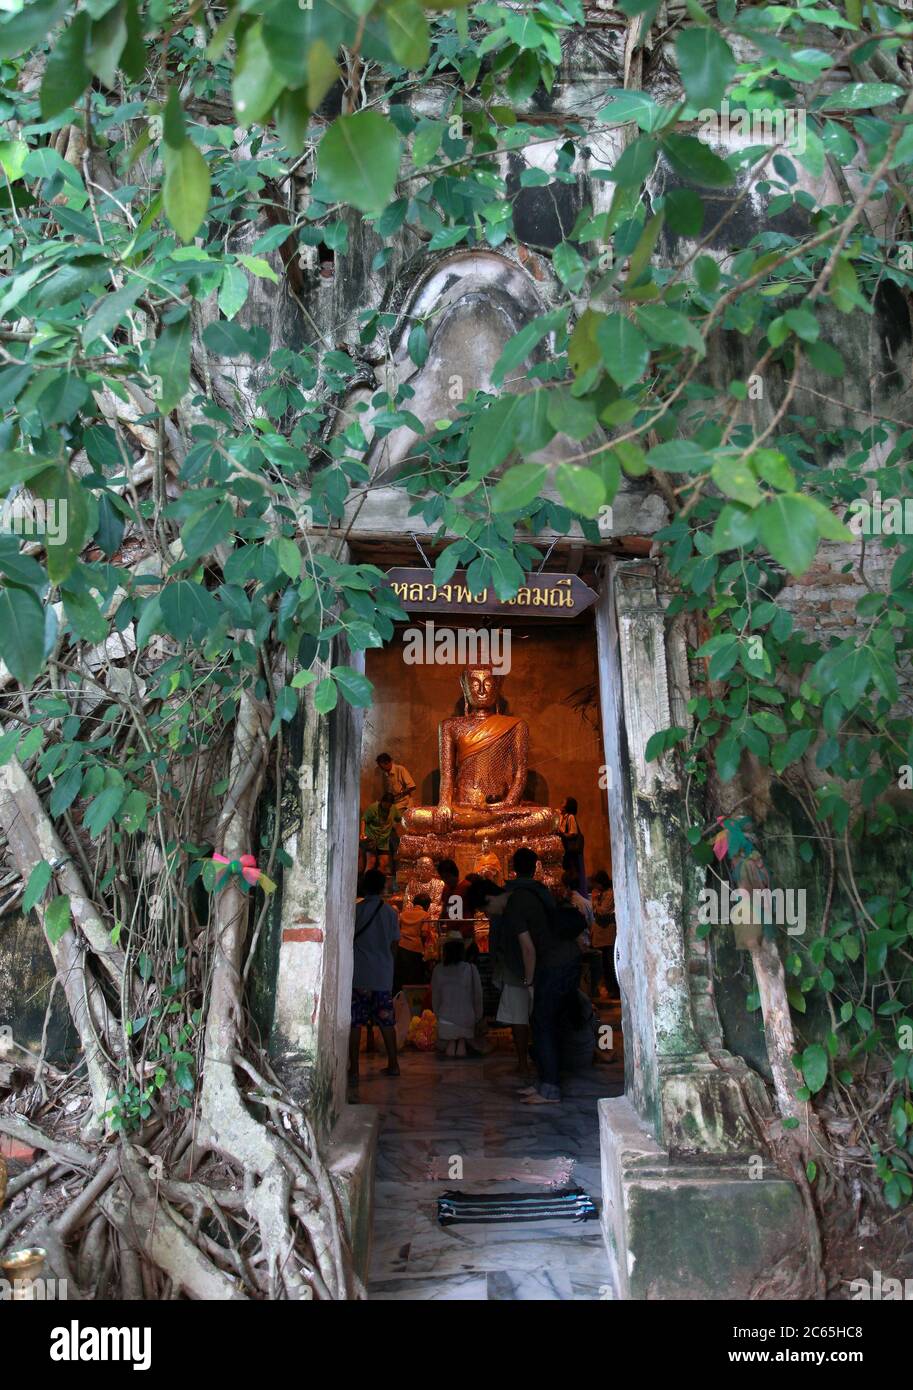 A view of Wat Bang Kung Banyan Tree Temple in Amphawa.Built in the Ayutthaya period 1767, the roots, trunk and leaves of the banyan tree dominate the temple where there is a statue of Buddha enshrined in the hall. It is about 85 kms southwest of Bangkok. Stock Photo